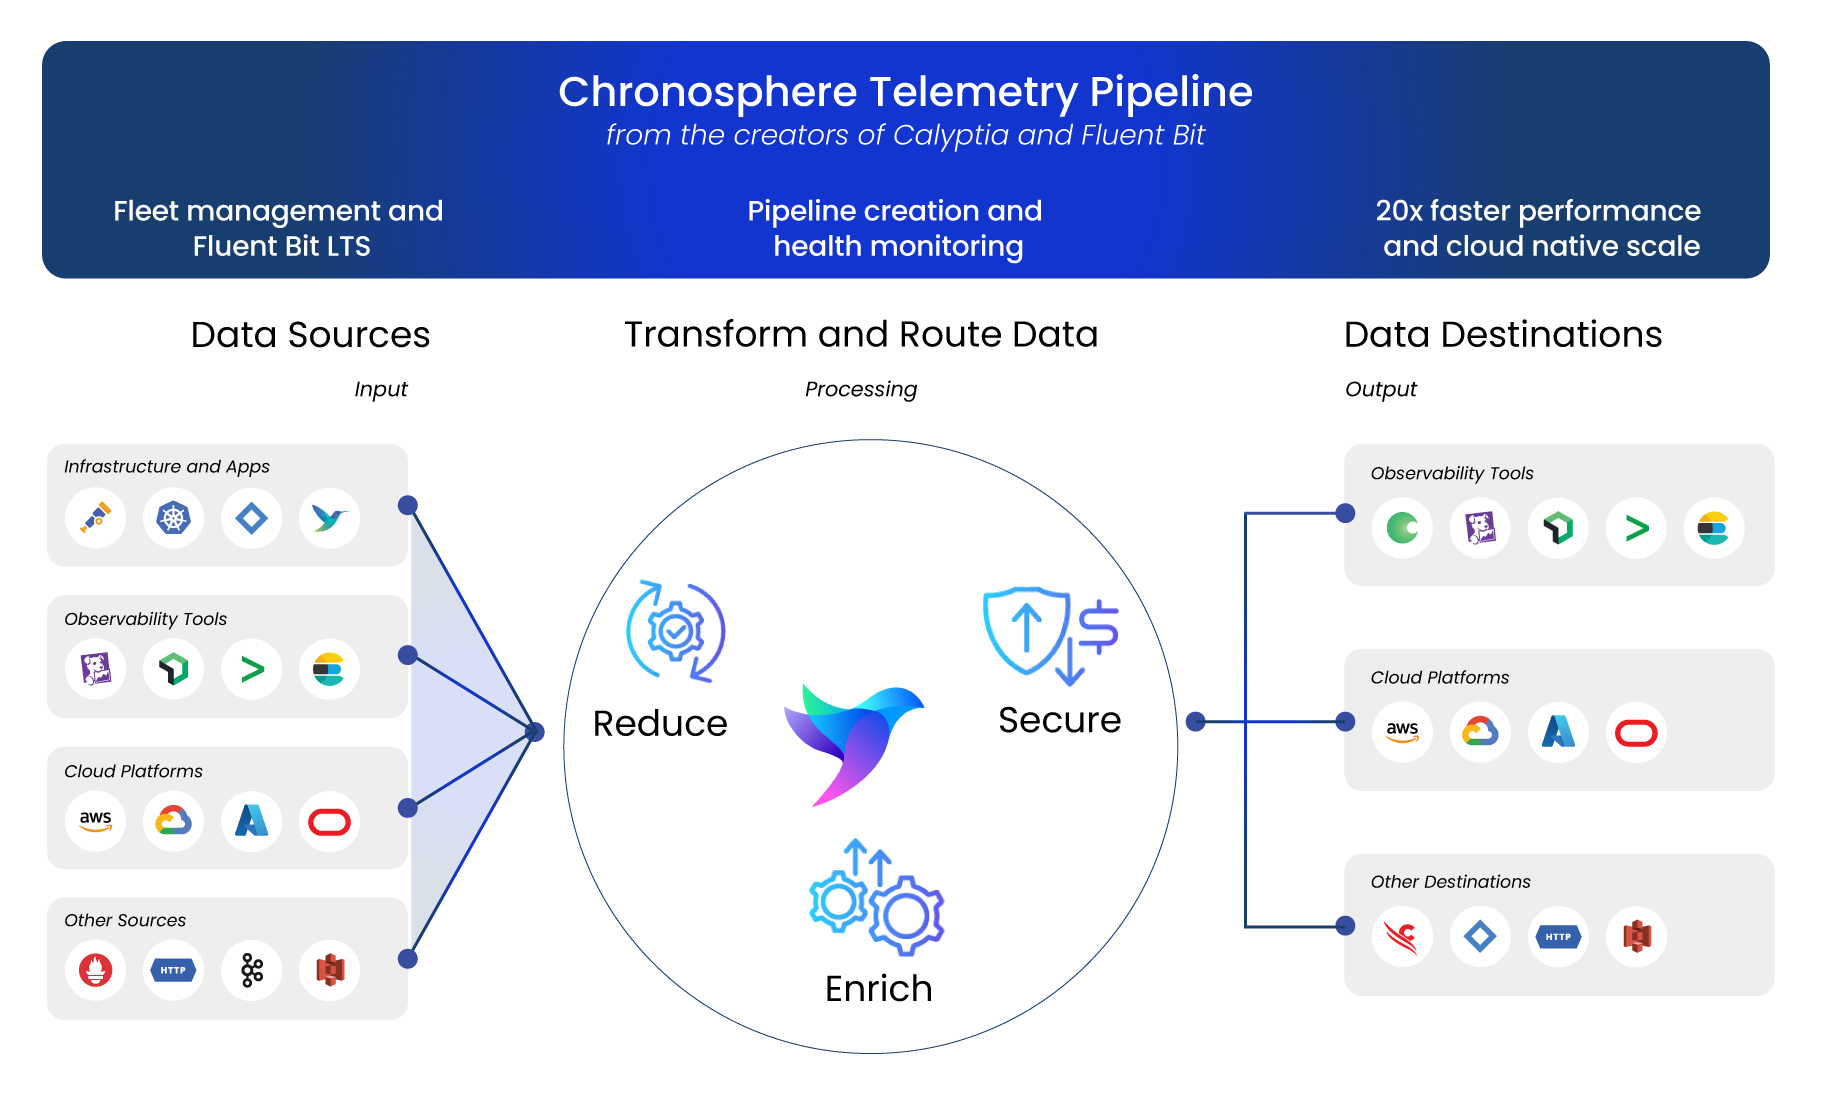 A conceptual diagram that describes Chronosphere Telemetry Pipeline. Various data sources provide input, Chronosphere transforms and routes this input, and the resulting output data is sent to various destinations.